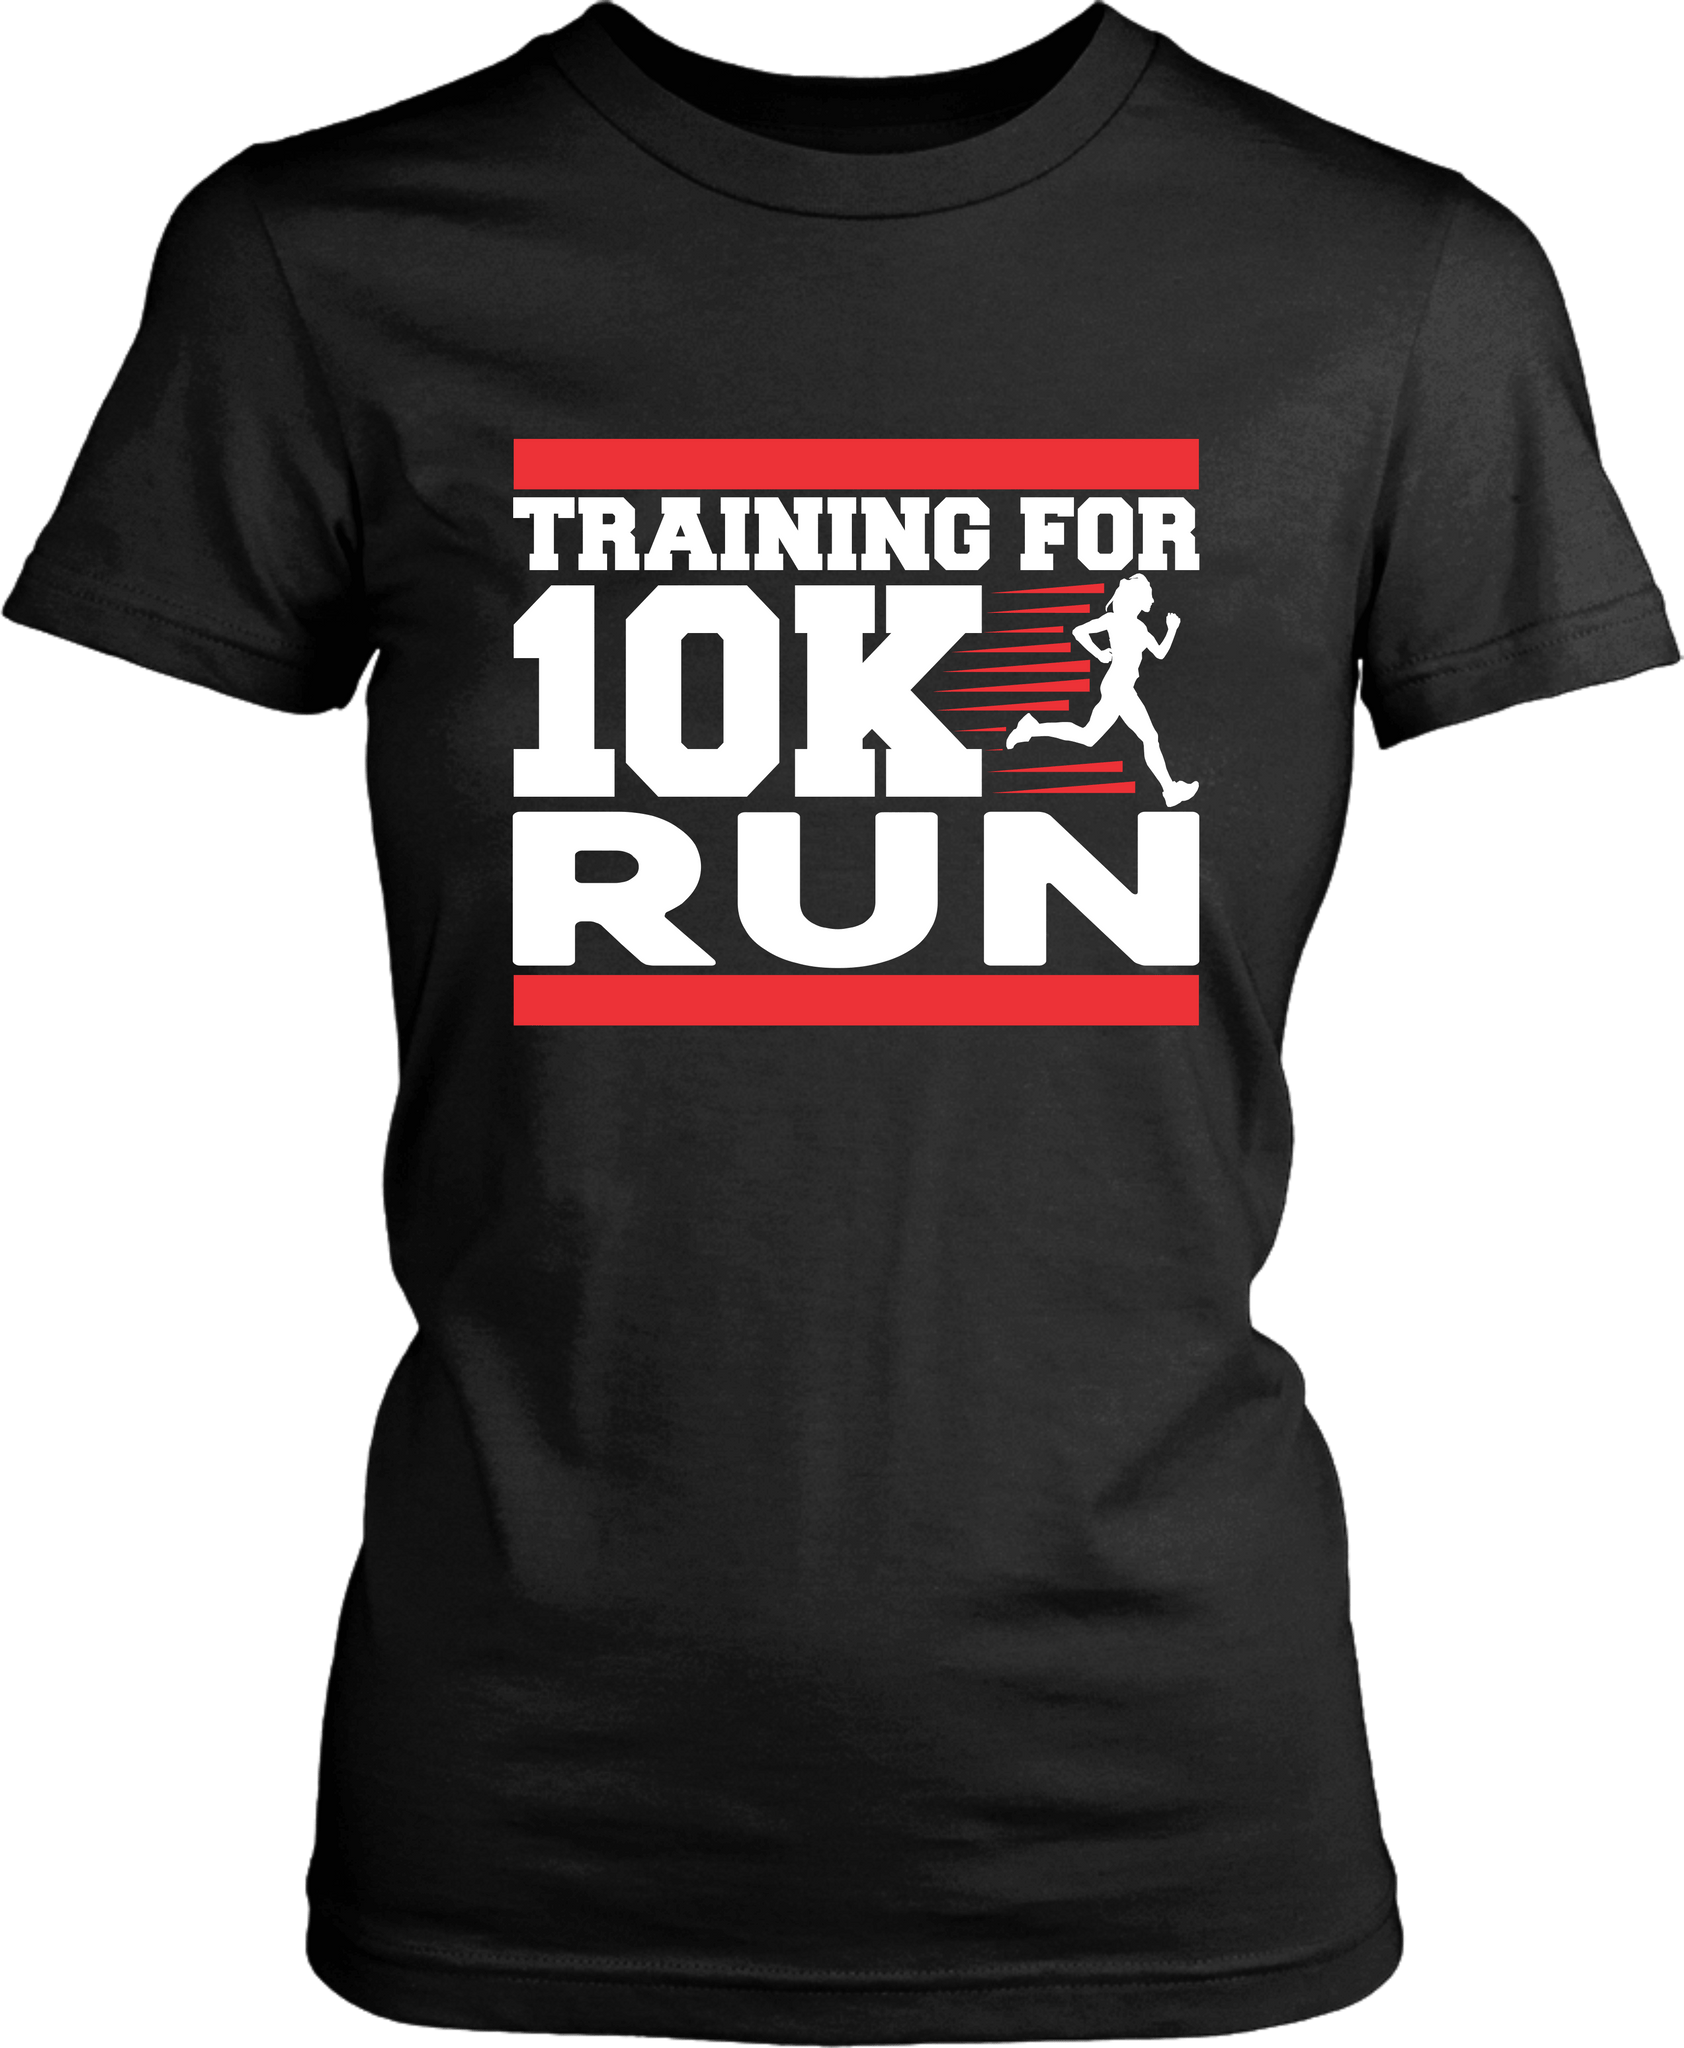 Black T-shirt Mock up with "Training For 10K Run" graphic design on the front, available from the Xpert Apparel Store